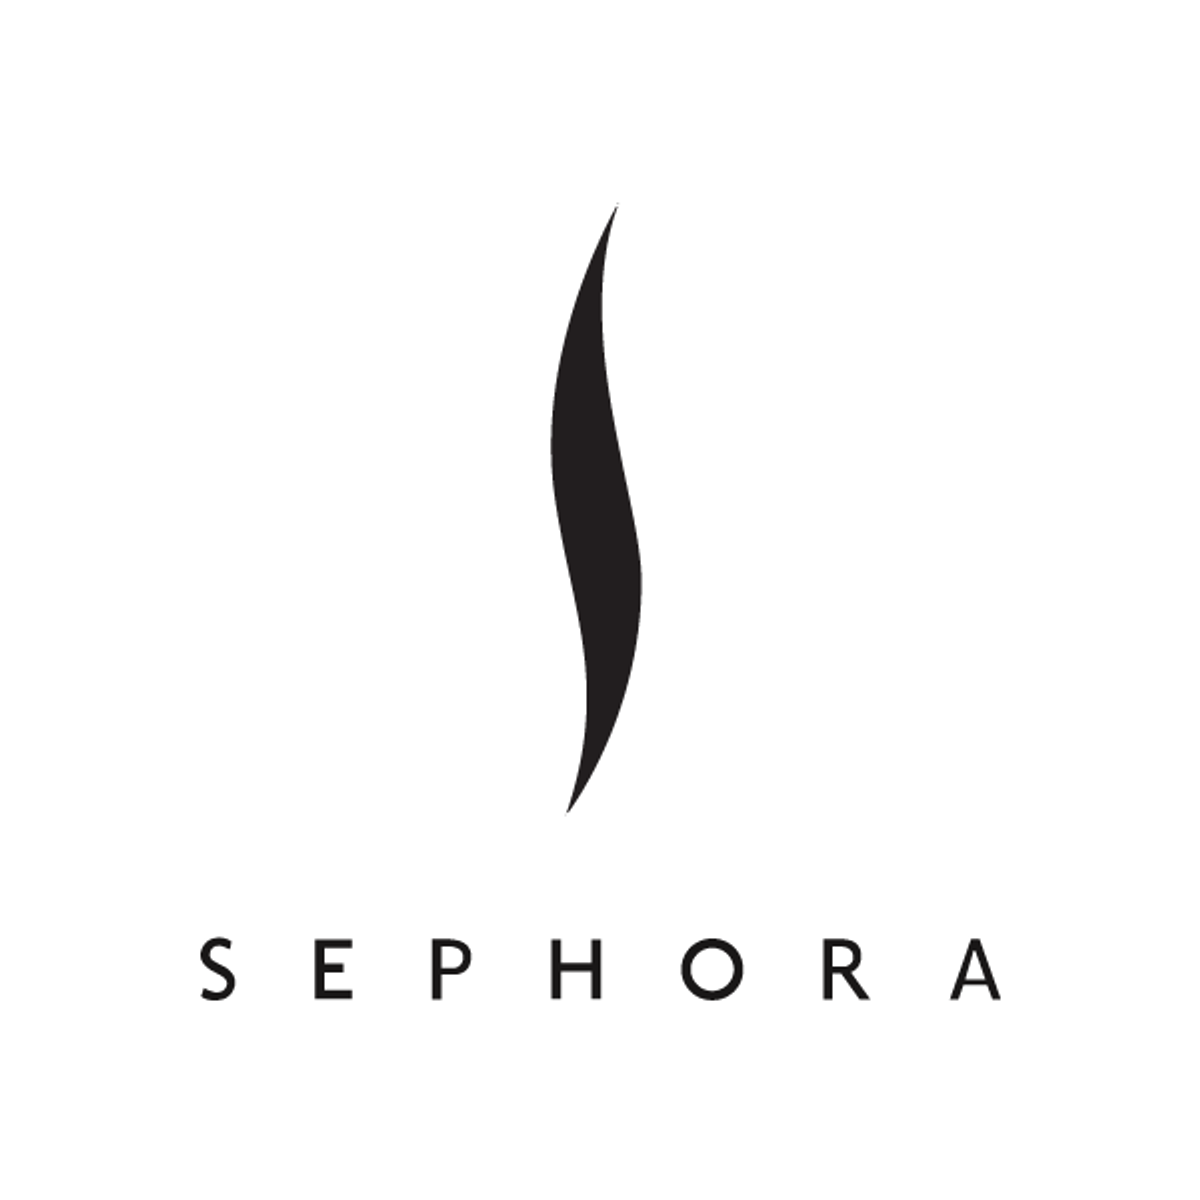 Top 5 Things to buy at Sephora